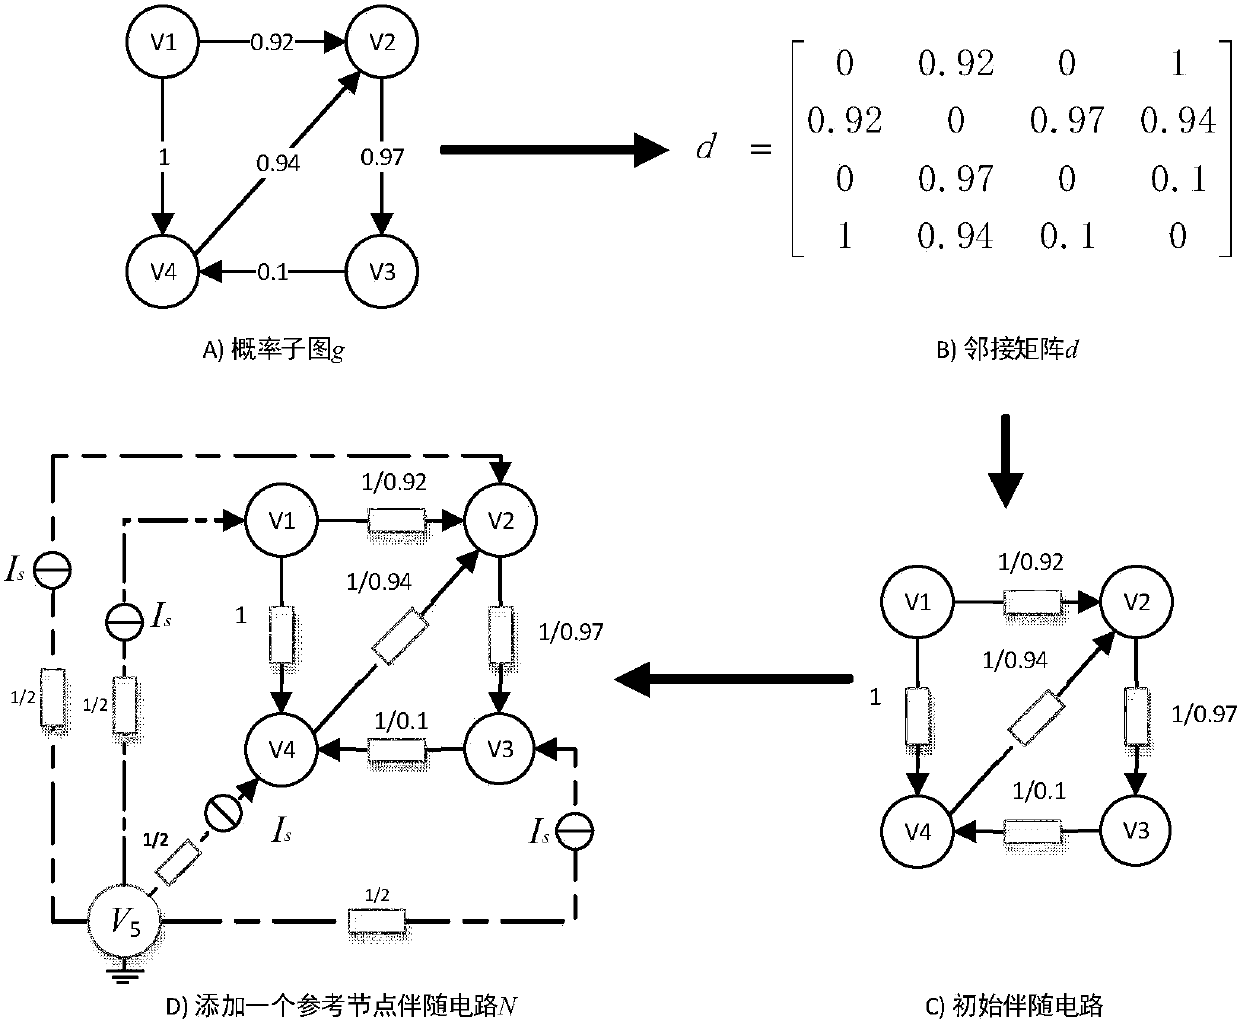 A Parallelized Frequent Probabilistic Subgraph Search Method Based on Merge Clustering